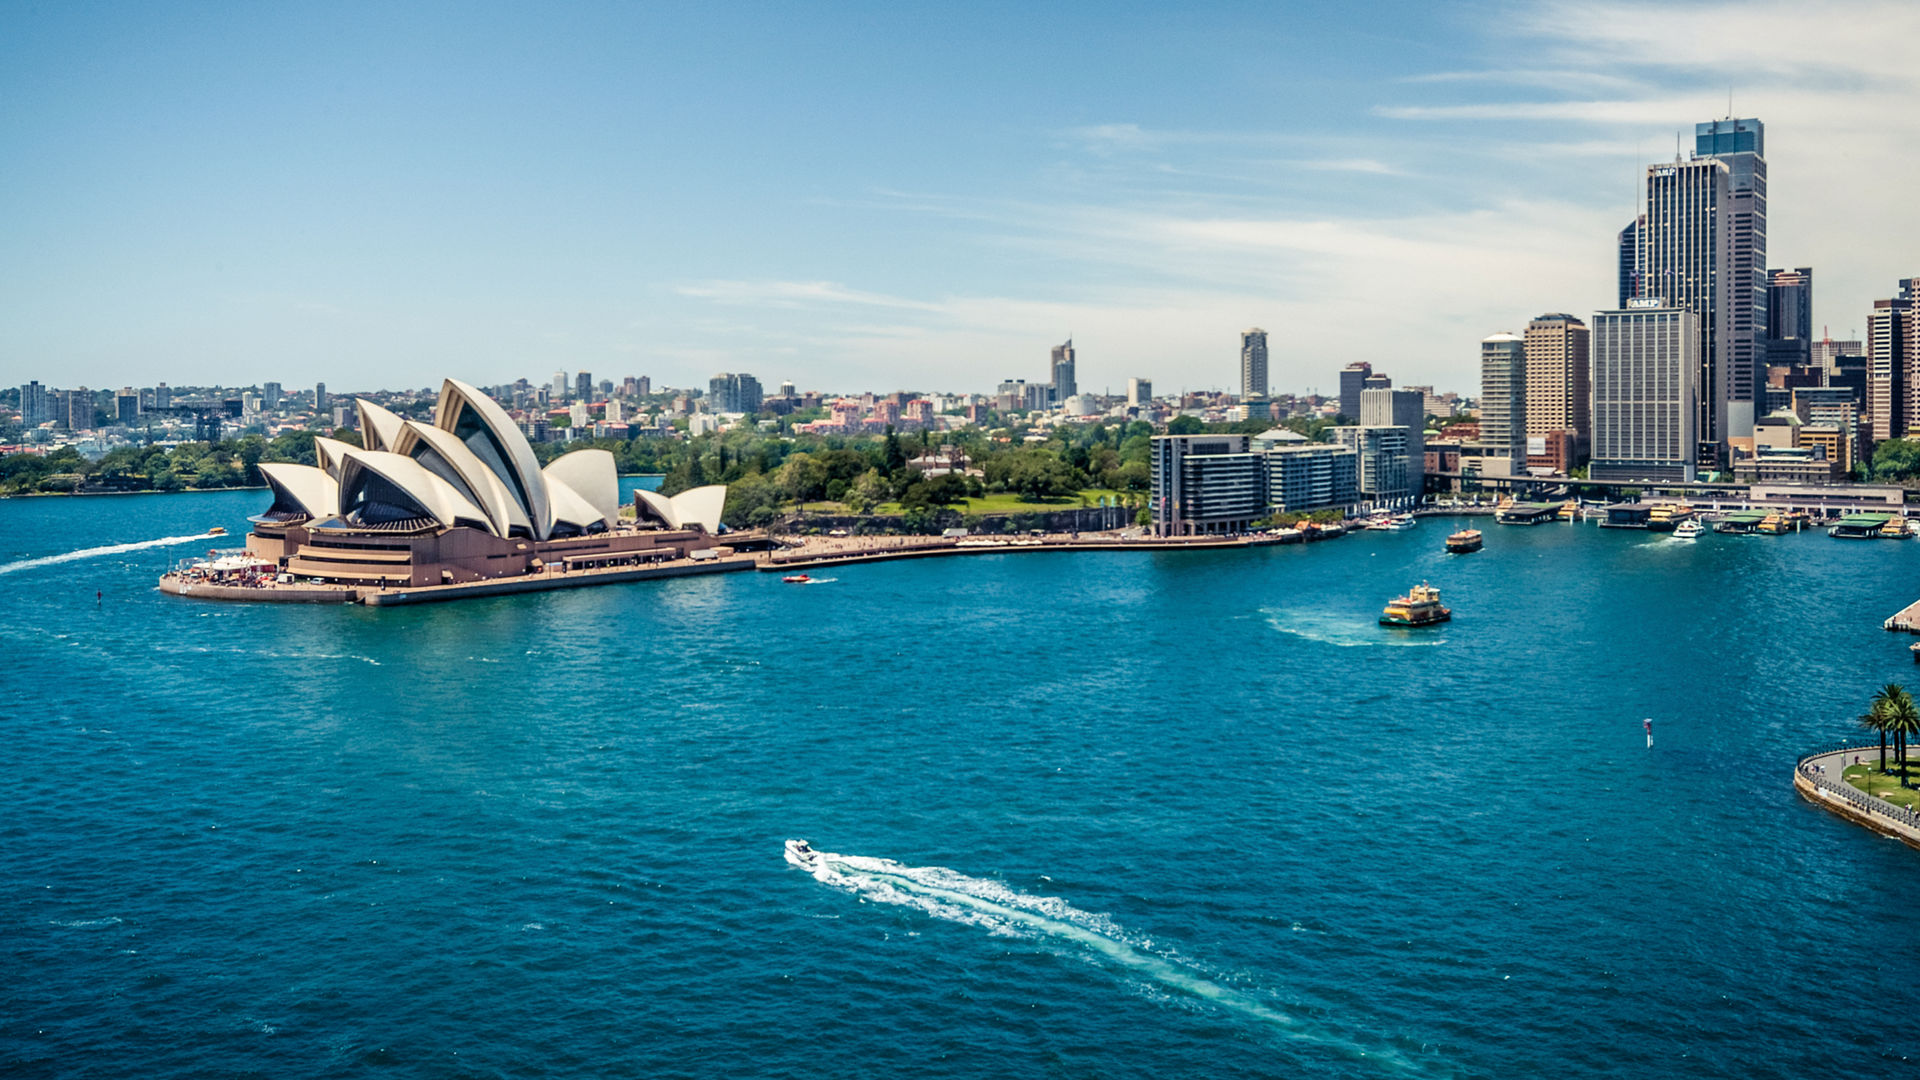 Sydney Opera House and Circular quay, ferry terminus, from the harbour bridge.